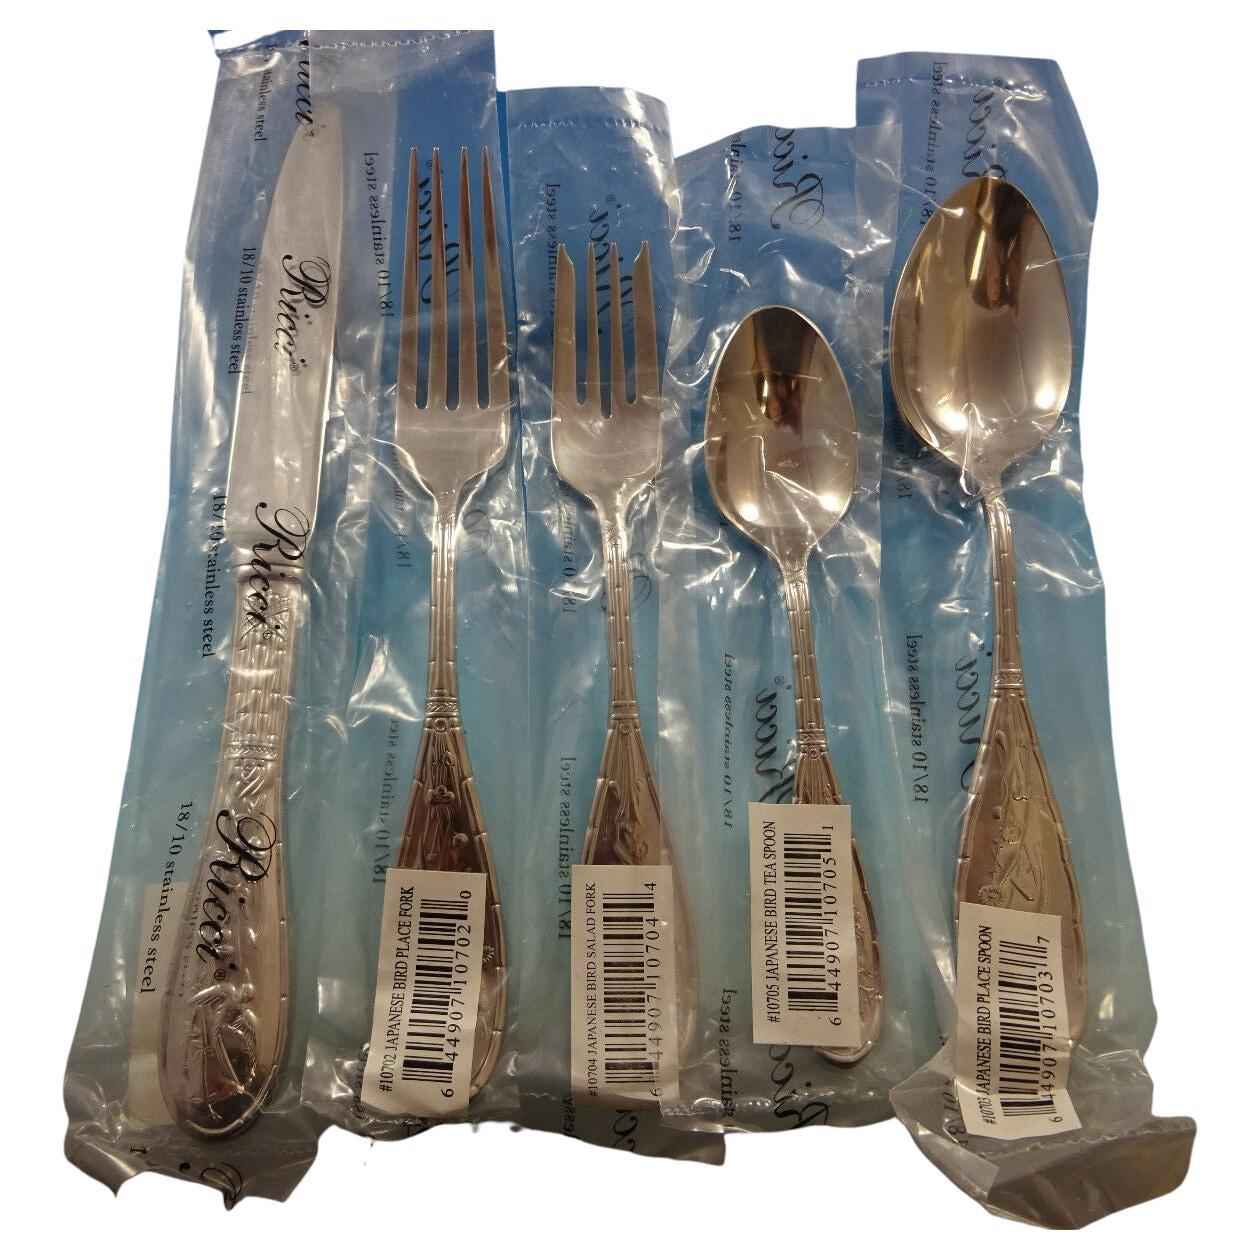 4 Towle DIAMOND ANTIQUE Frosted 18/10 Stainless Flatware 6 1/4" TEASPOONS 